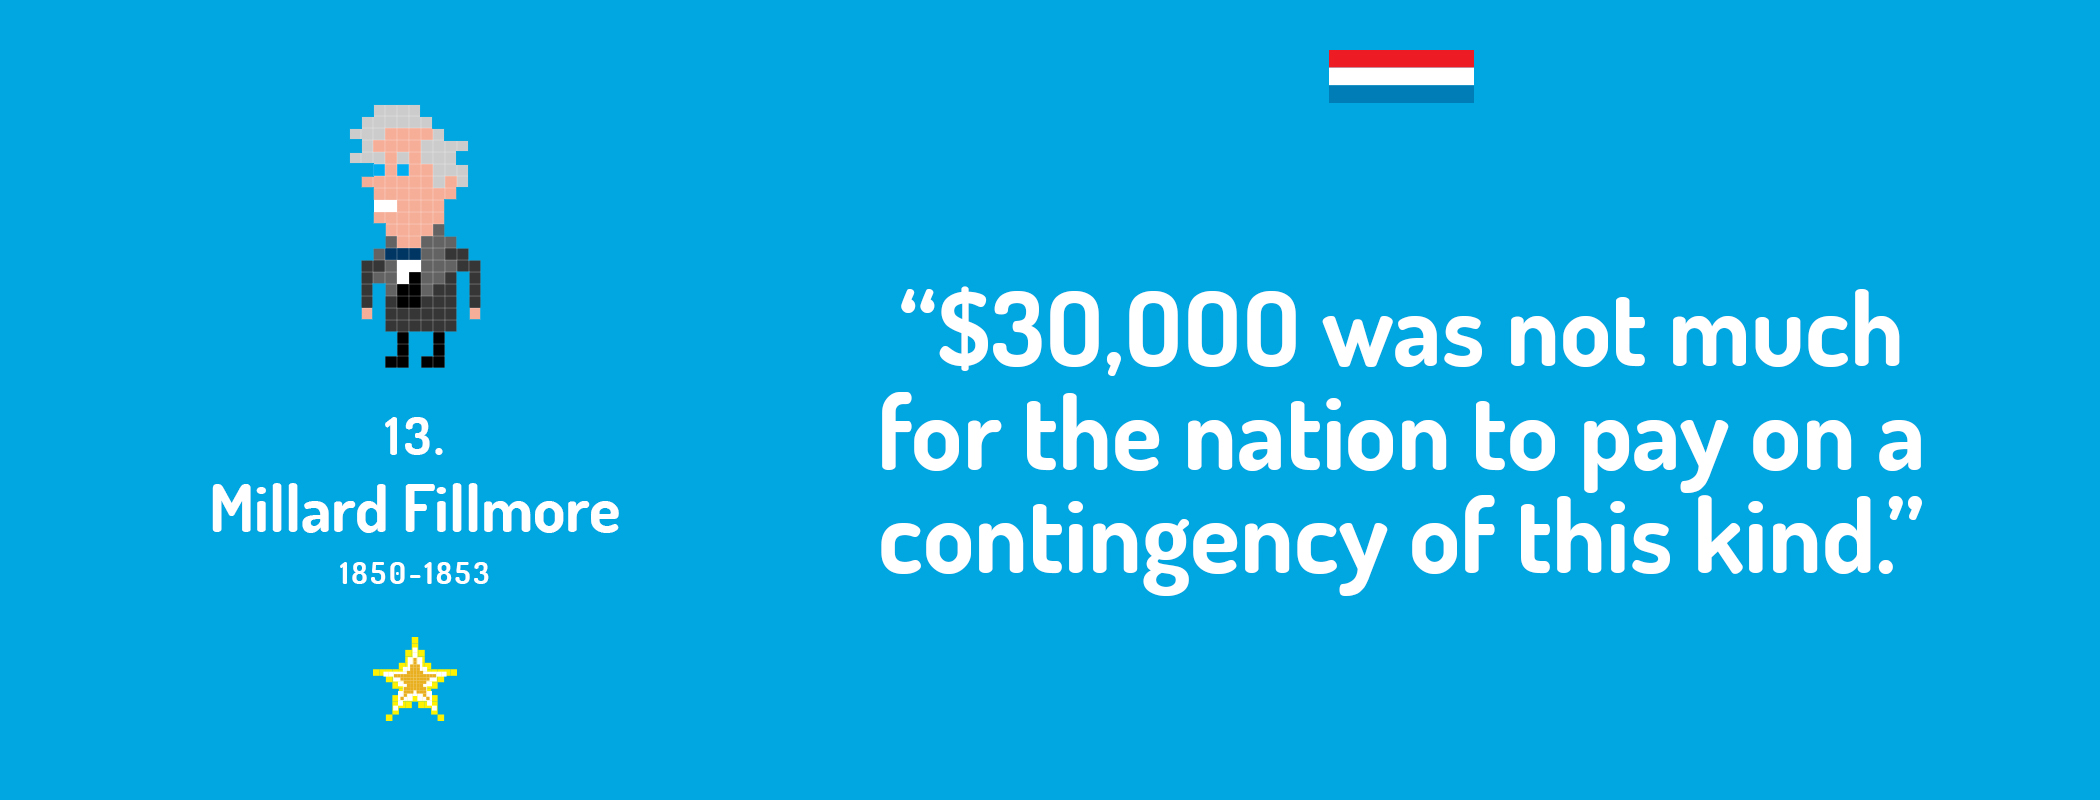 Thirty thousand dollars was not much for the nation to pay on a contingency of this kind.